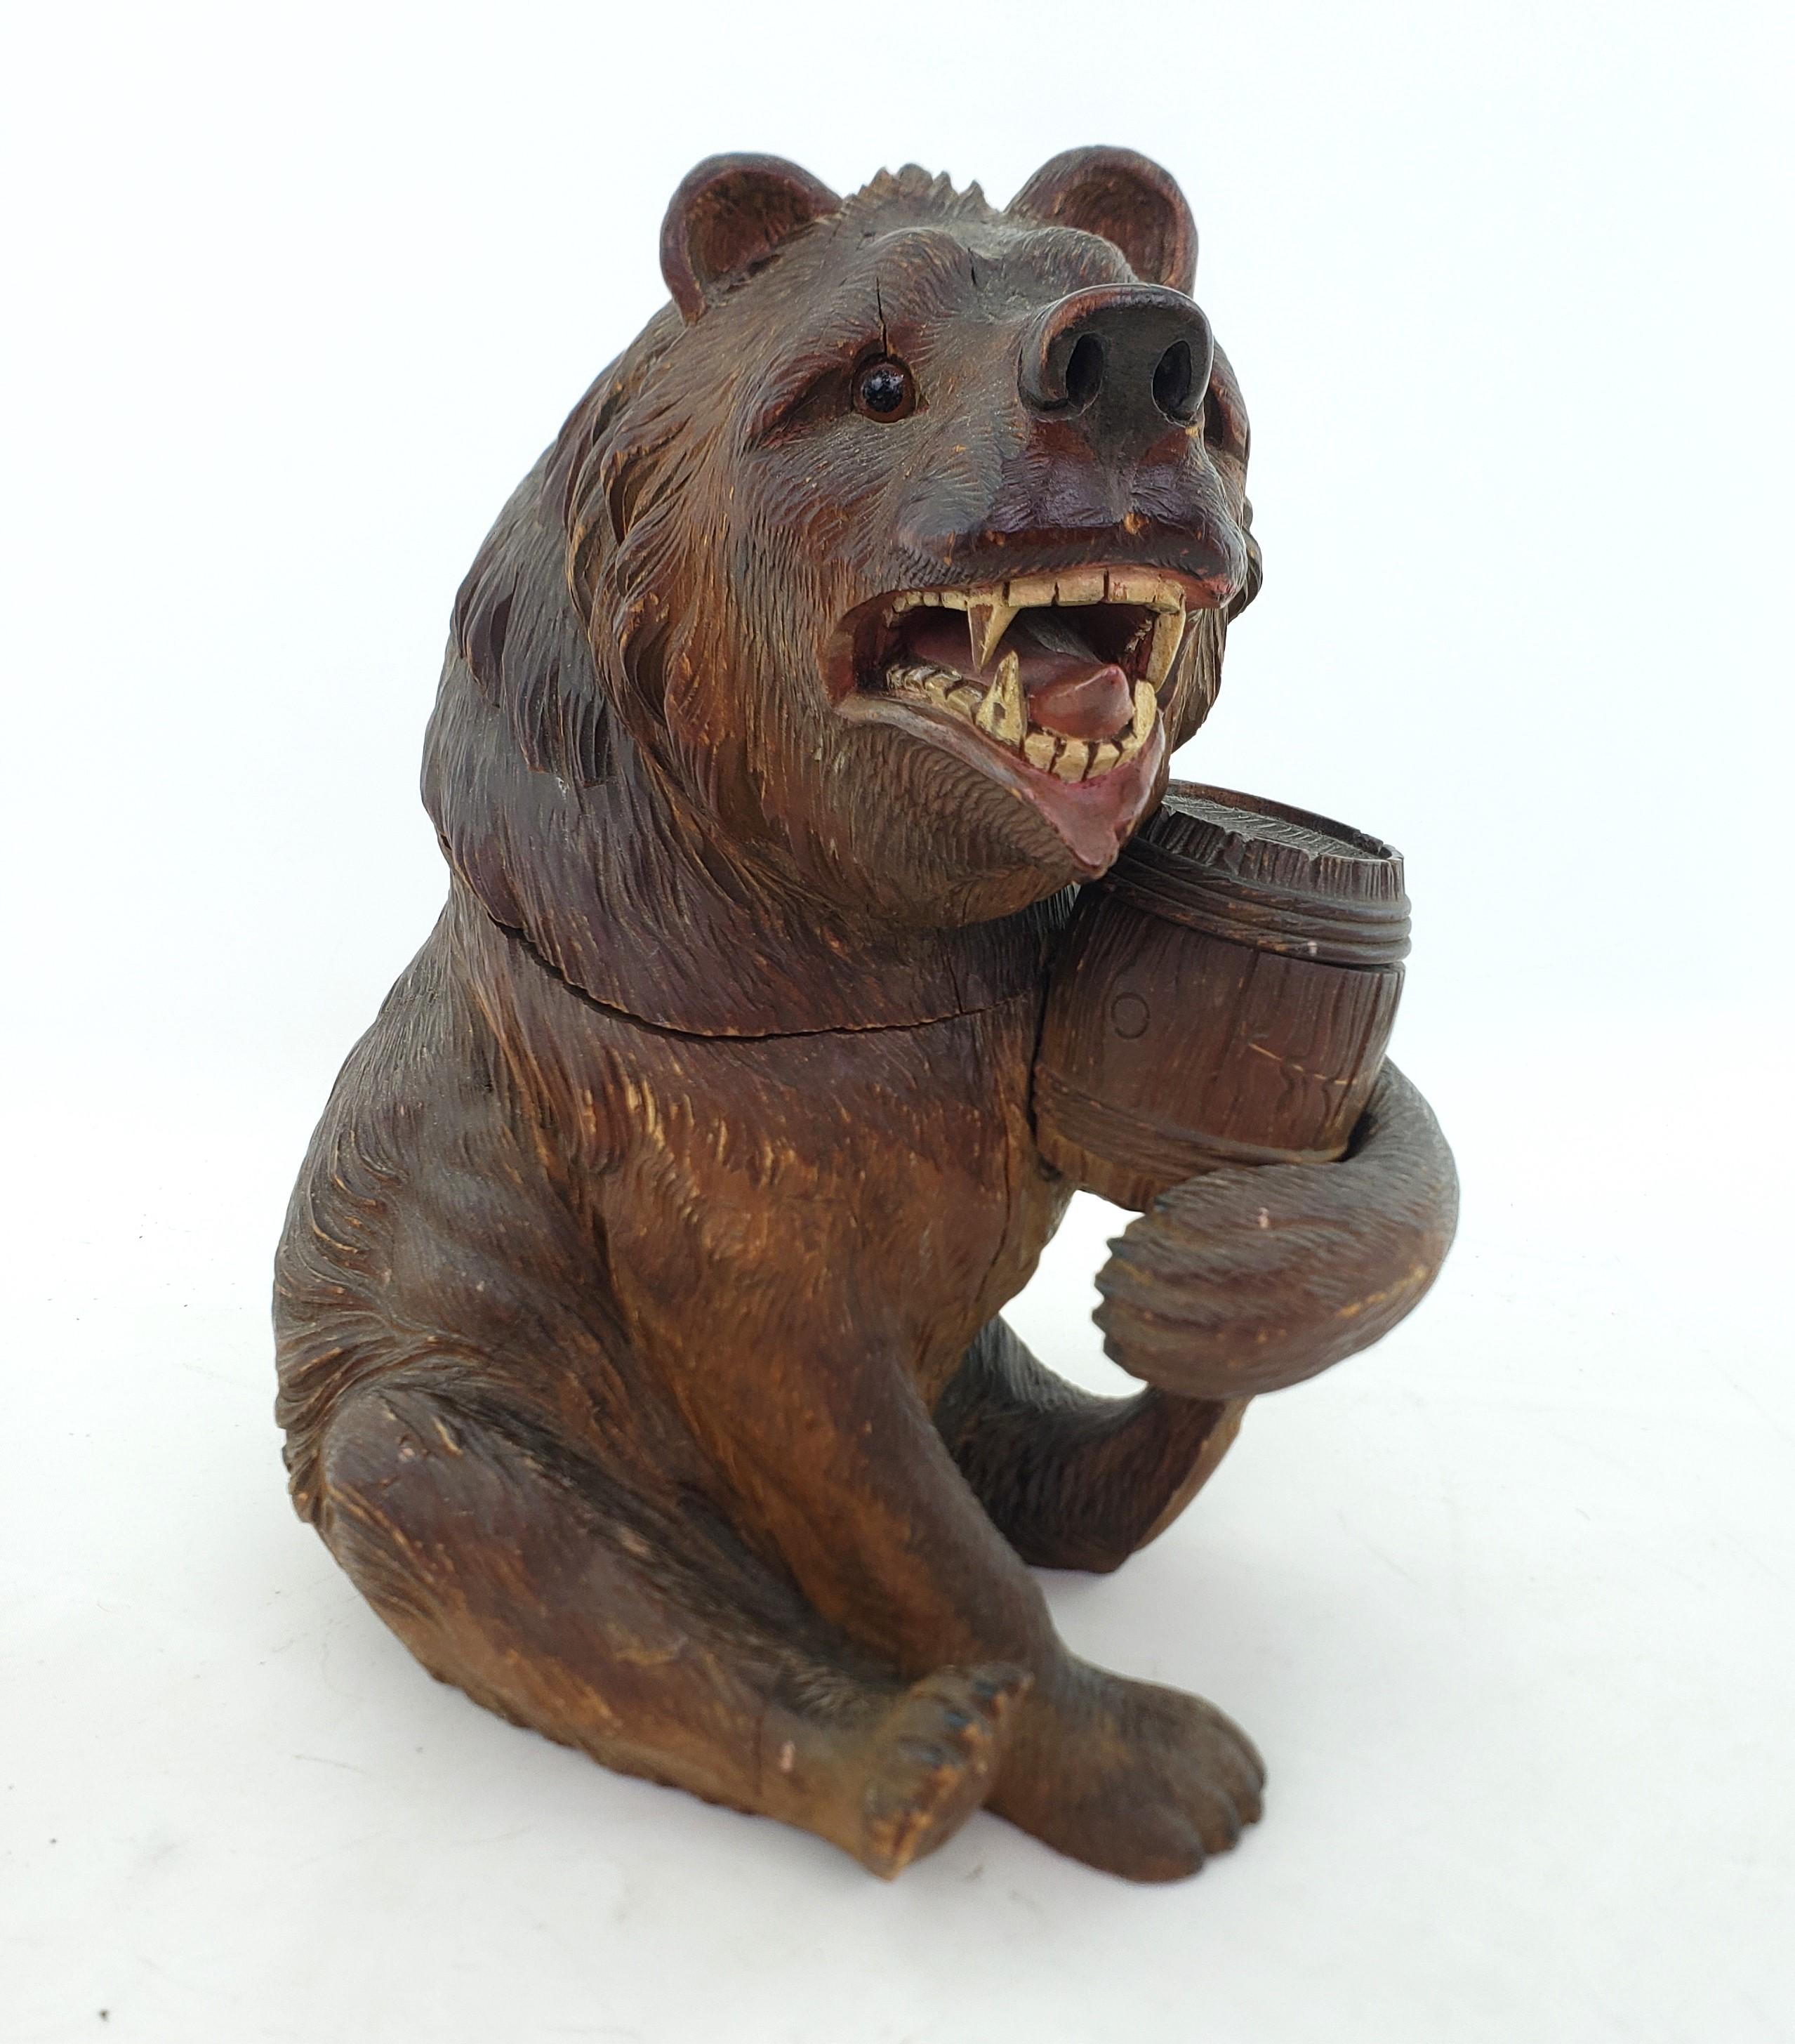 This large antique humidor is unsigned, but presumed to have originated from Austria and date to approximately 1900 and done in the period Black Forest style. This well executed sculptural humidor is done in pine and depicts a very angry bear